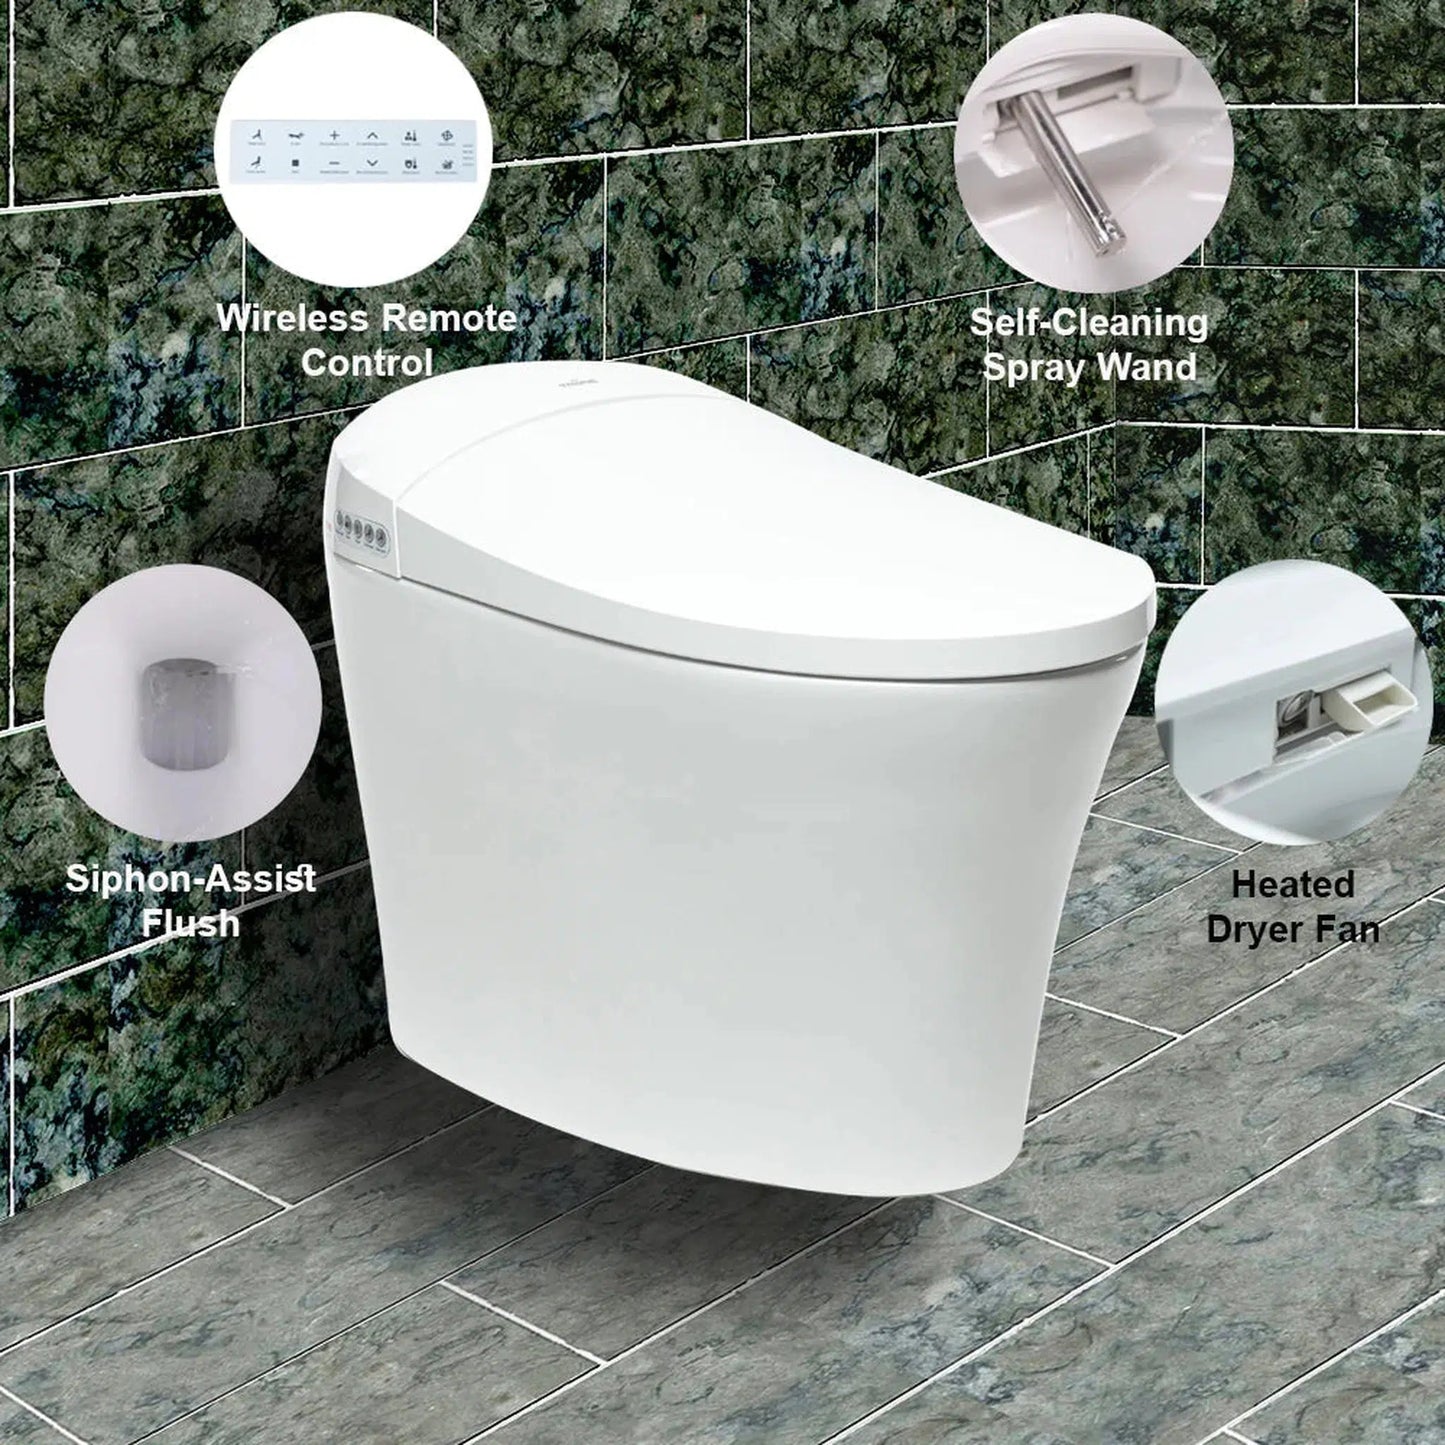 Trone Fountina White Elongated Electronic Luxury Toilet With Integrated Bidet